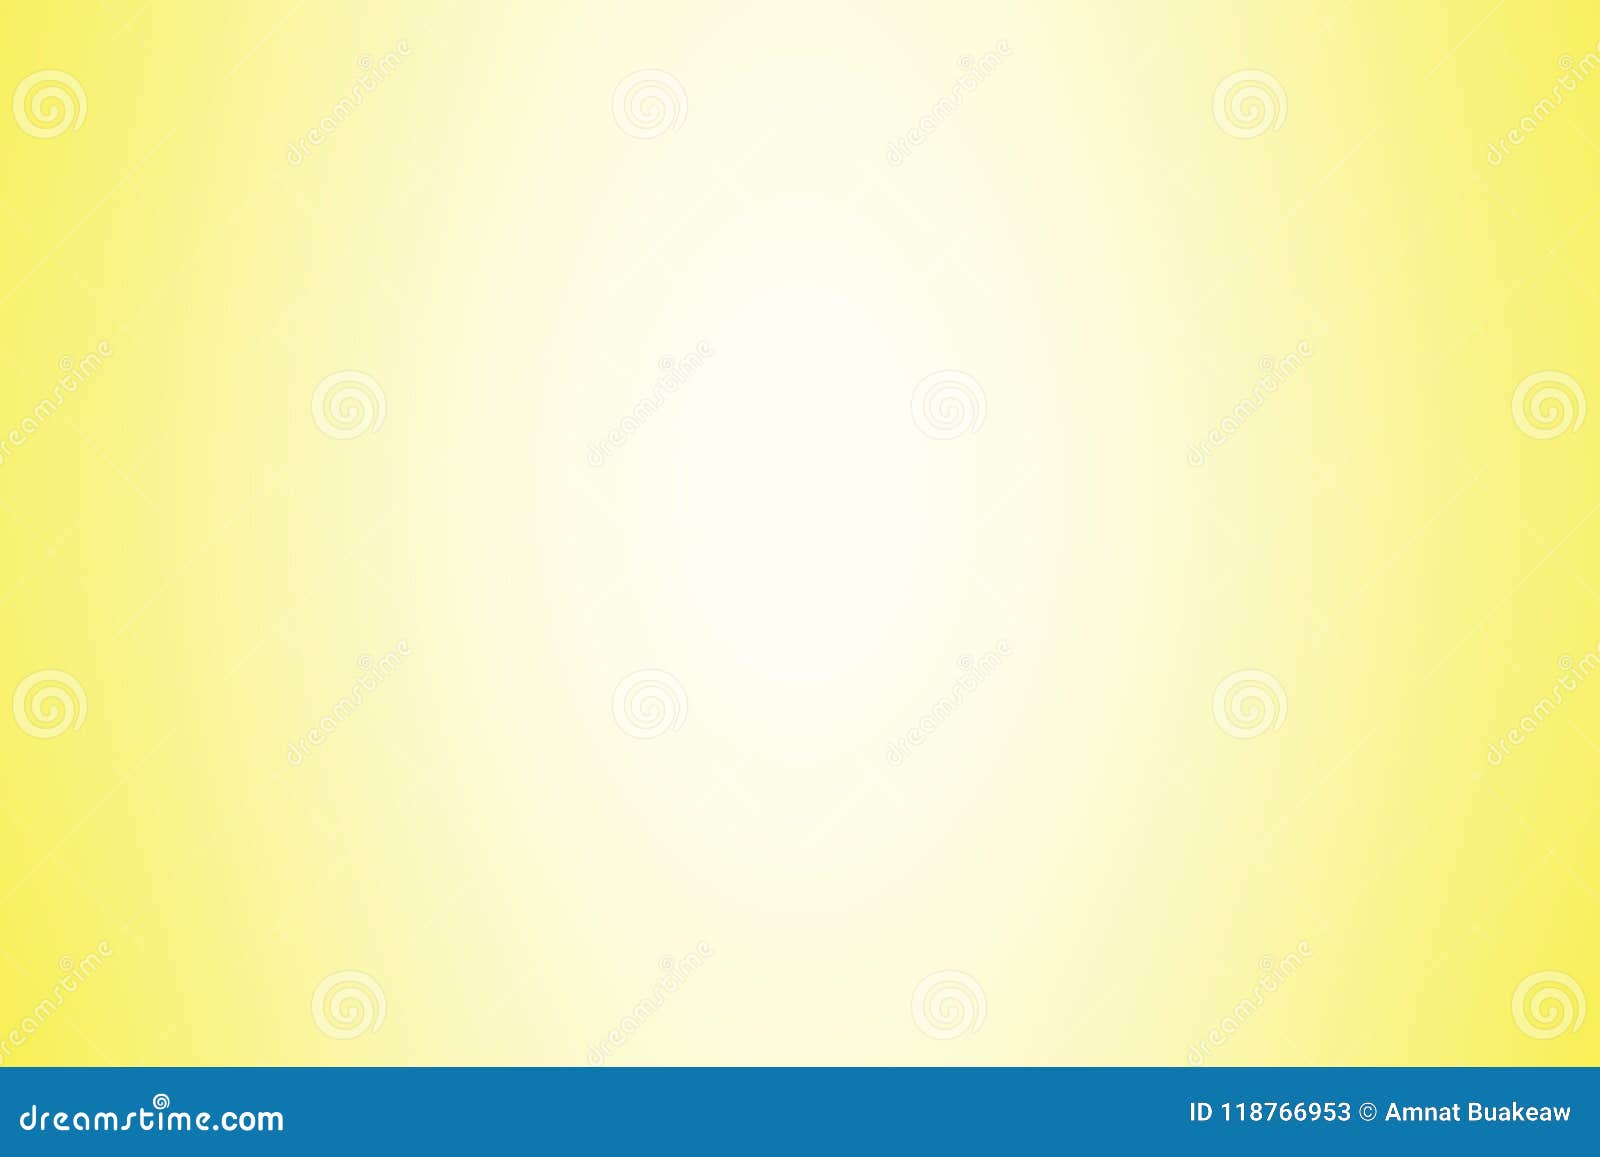 Yellow and White Wallpaper (60+ images)